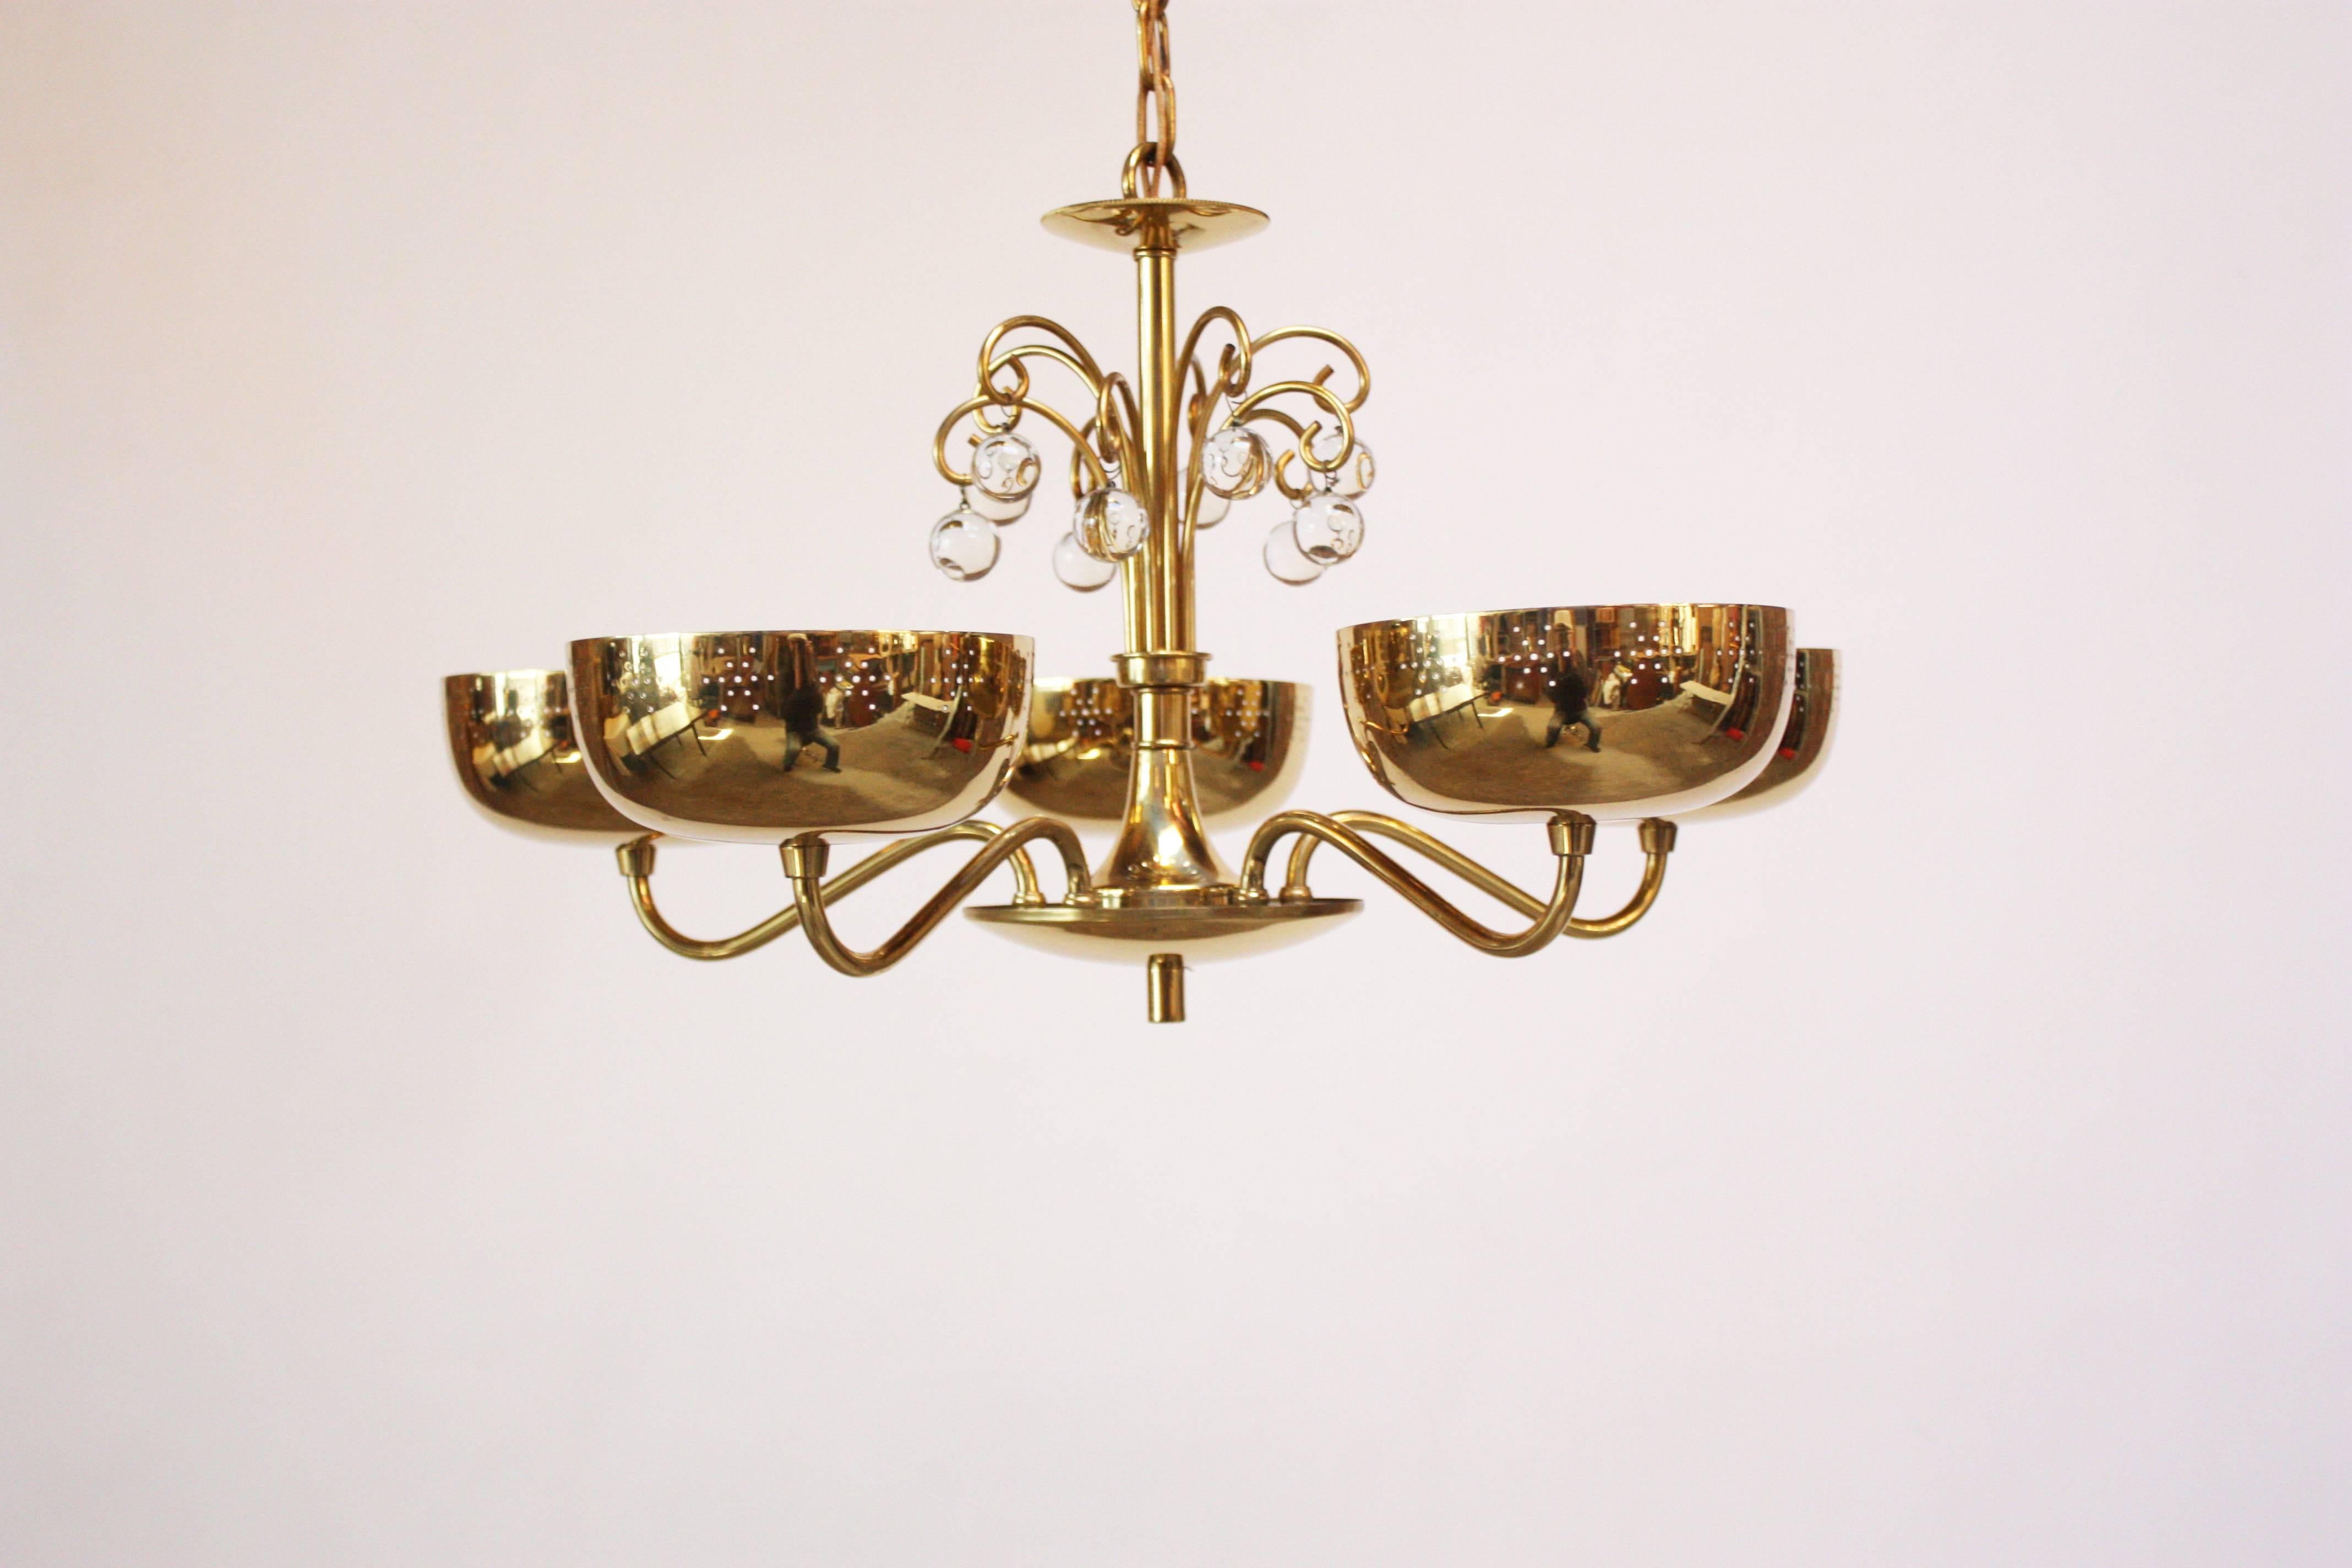 Midcentury brass chandelier with five perforated shades with white painted interiors. Perforation is a 'star' pattern. Fixture is adorned with decorative glass beads and includes the brass canopy.
Measure: Height from the brass loop to the bottom